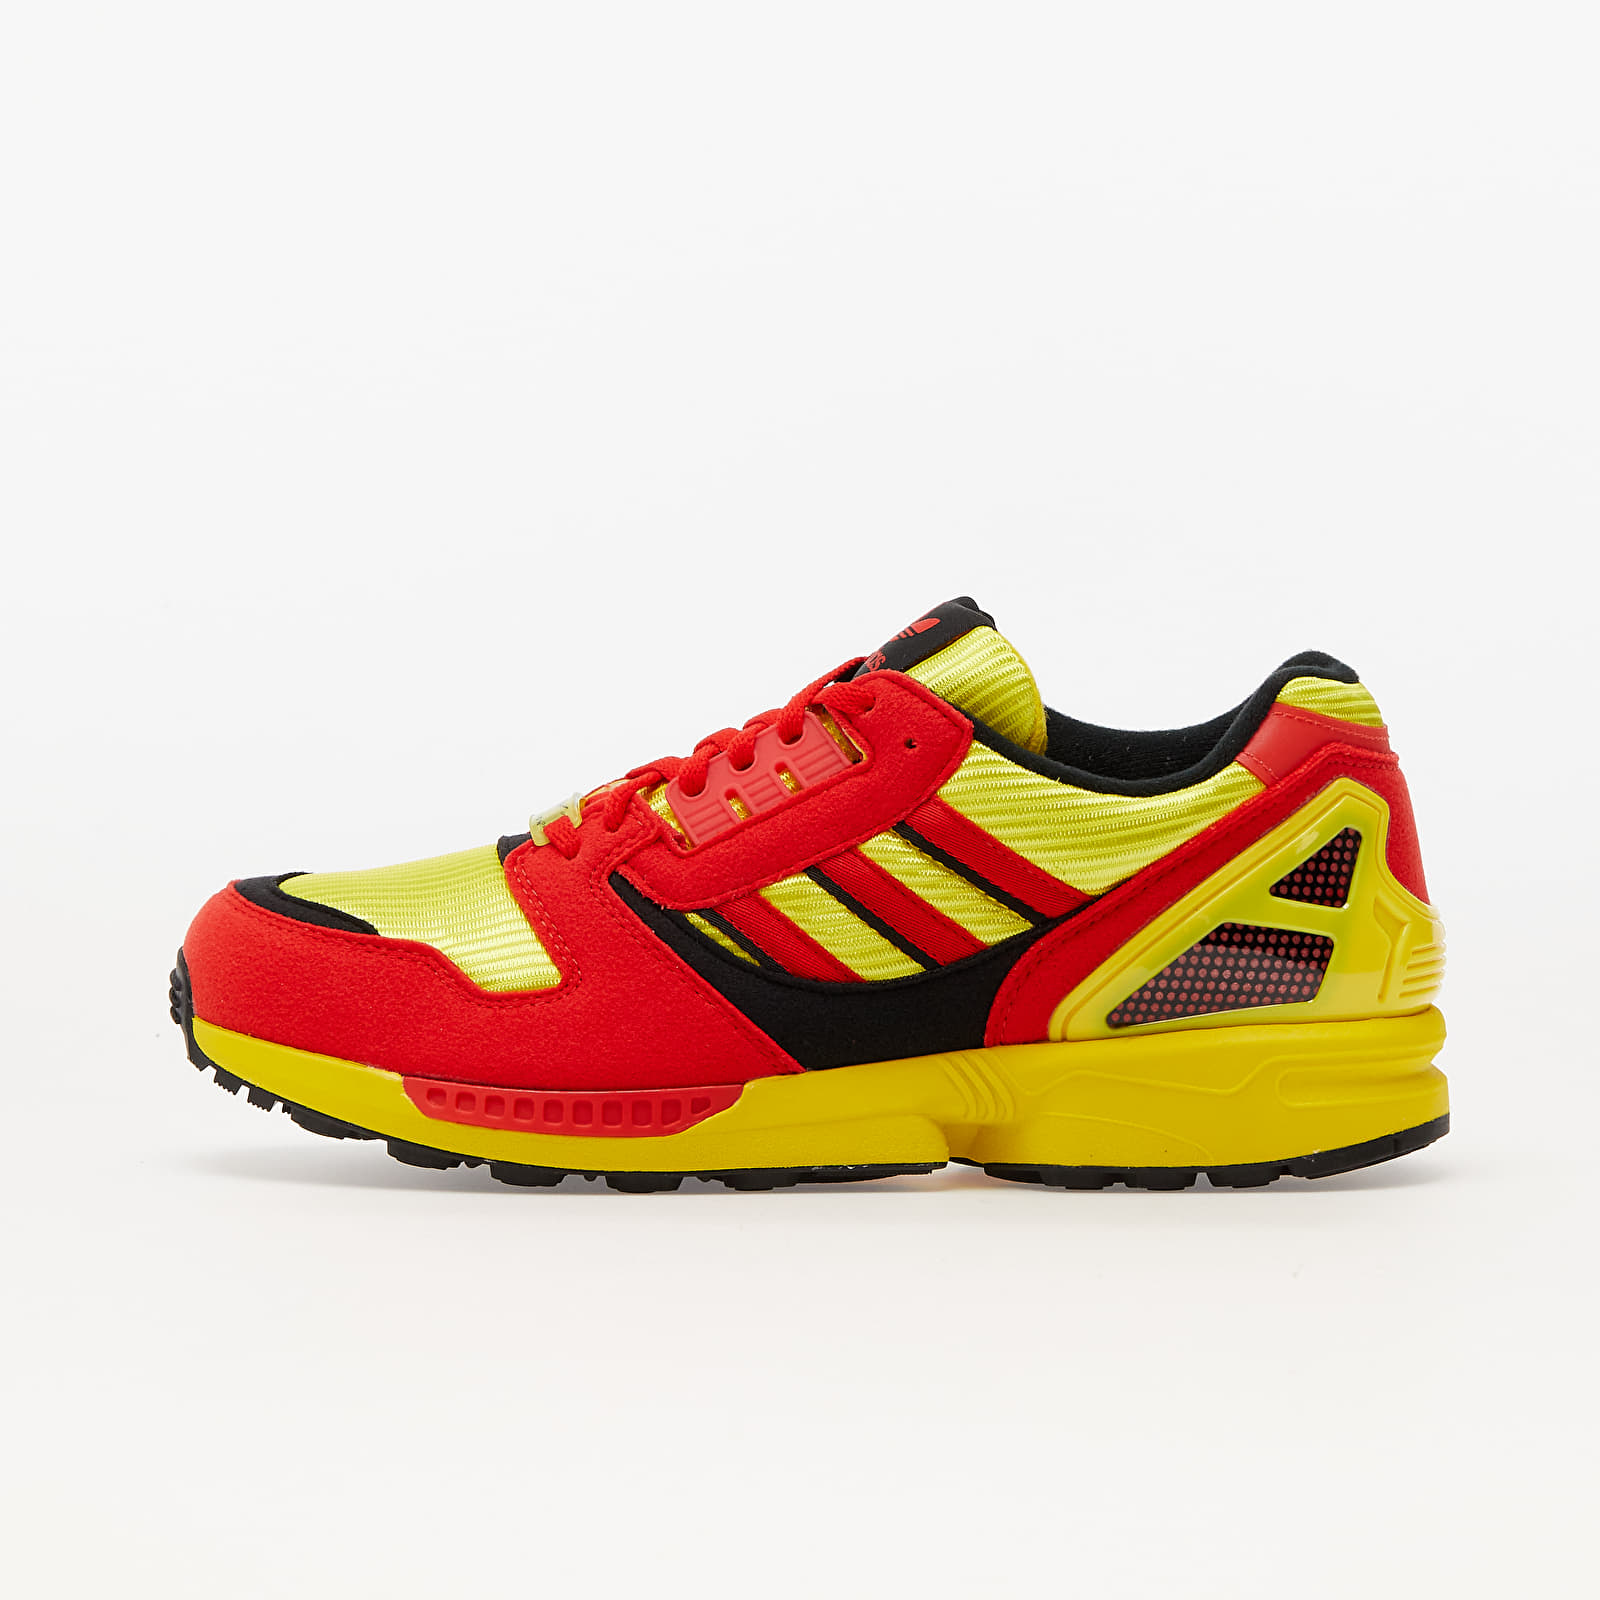 Men's shoes adidas ZX 8000 Bright Yellow/ Core Black/ Red